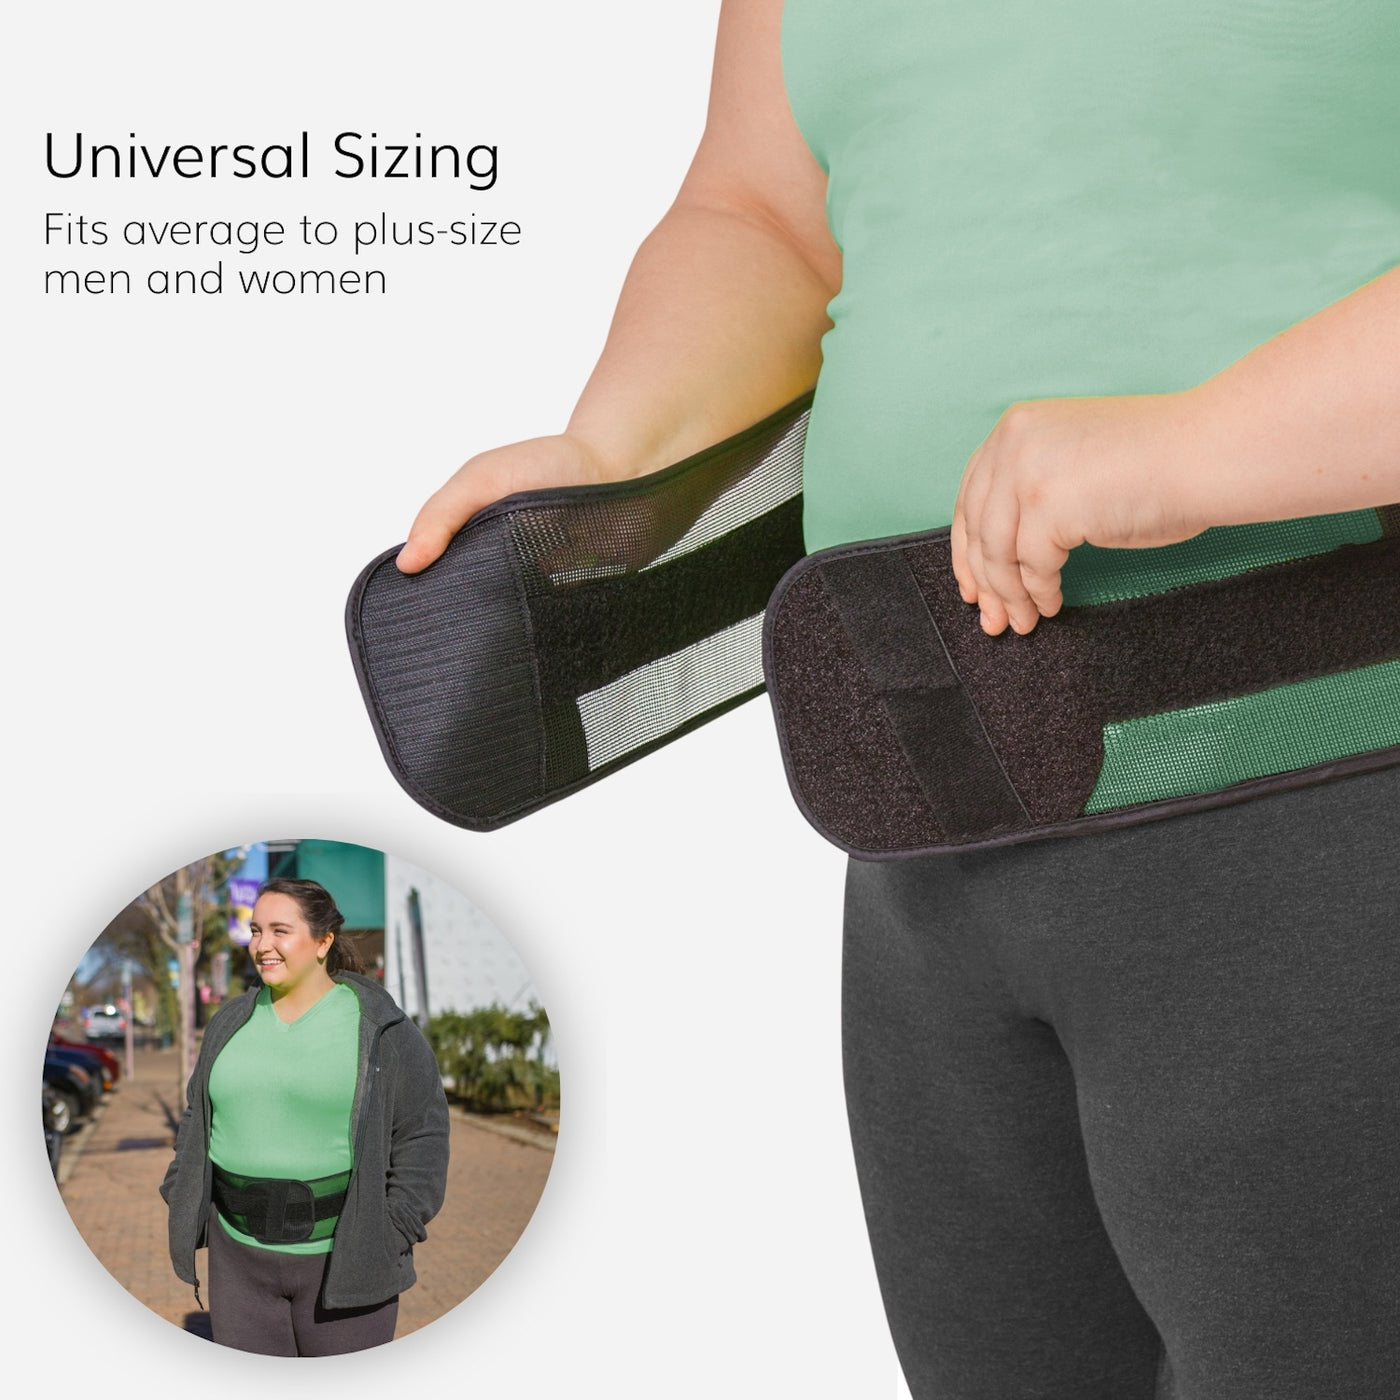 Our adjustable low back brace has universal sizing so it can fit average to plus size men and women